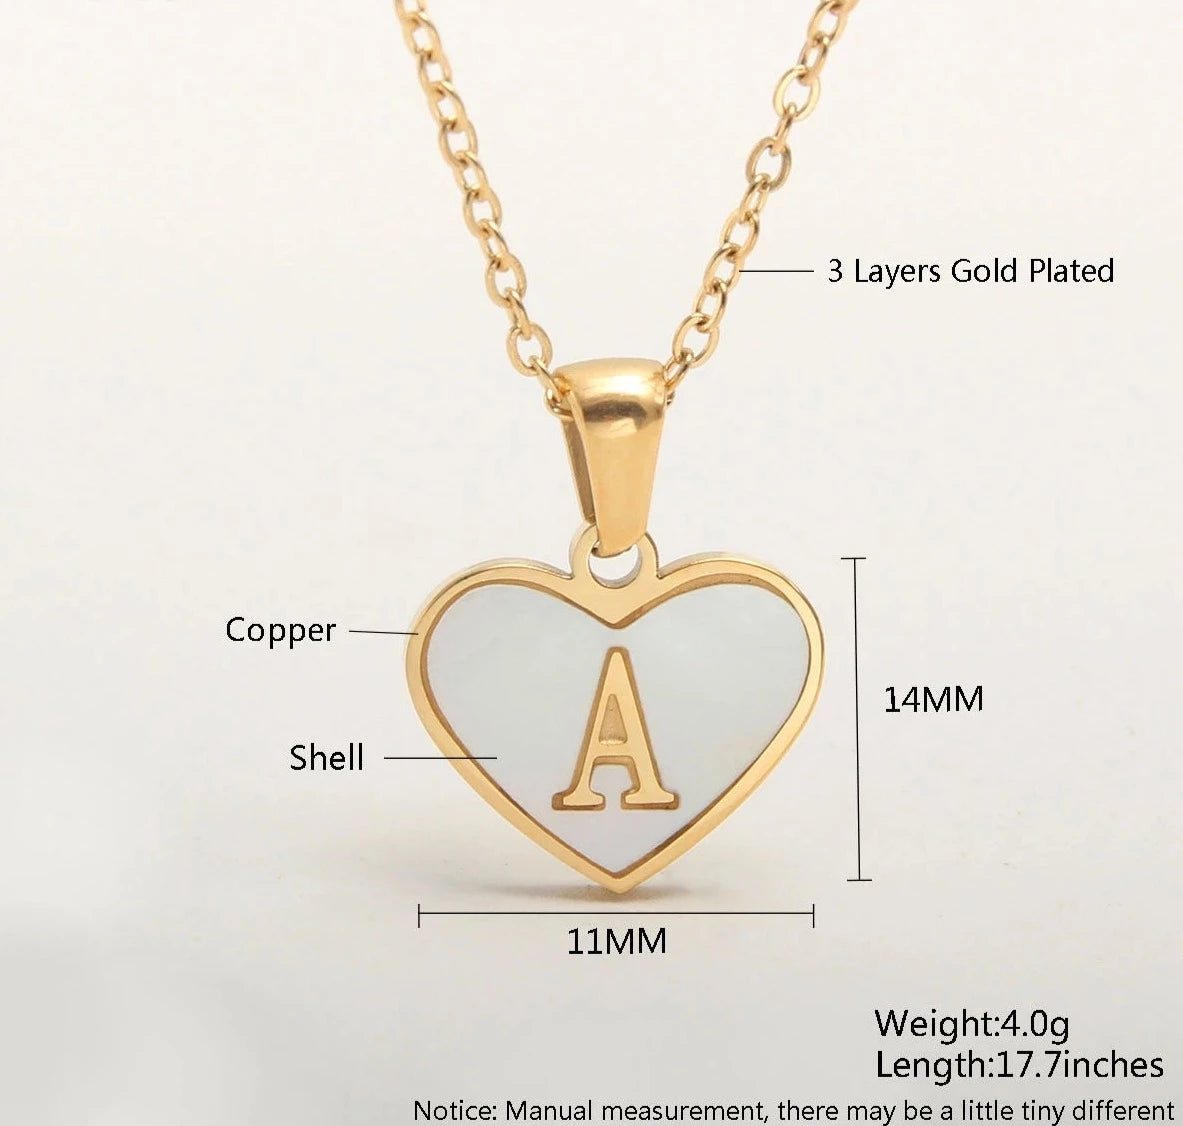 Elegance in Letters: A-Z Initials Alphabet Pendant Necklace Jewelry for Girls, Teens, and Women with Heart,  Anti-Allergic Letter Choker!